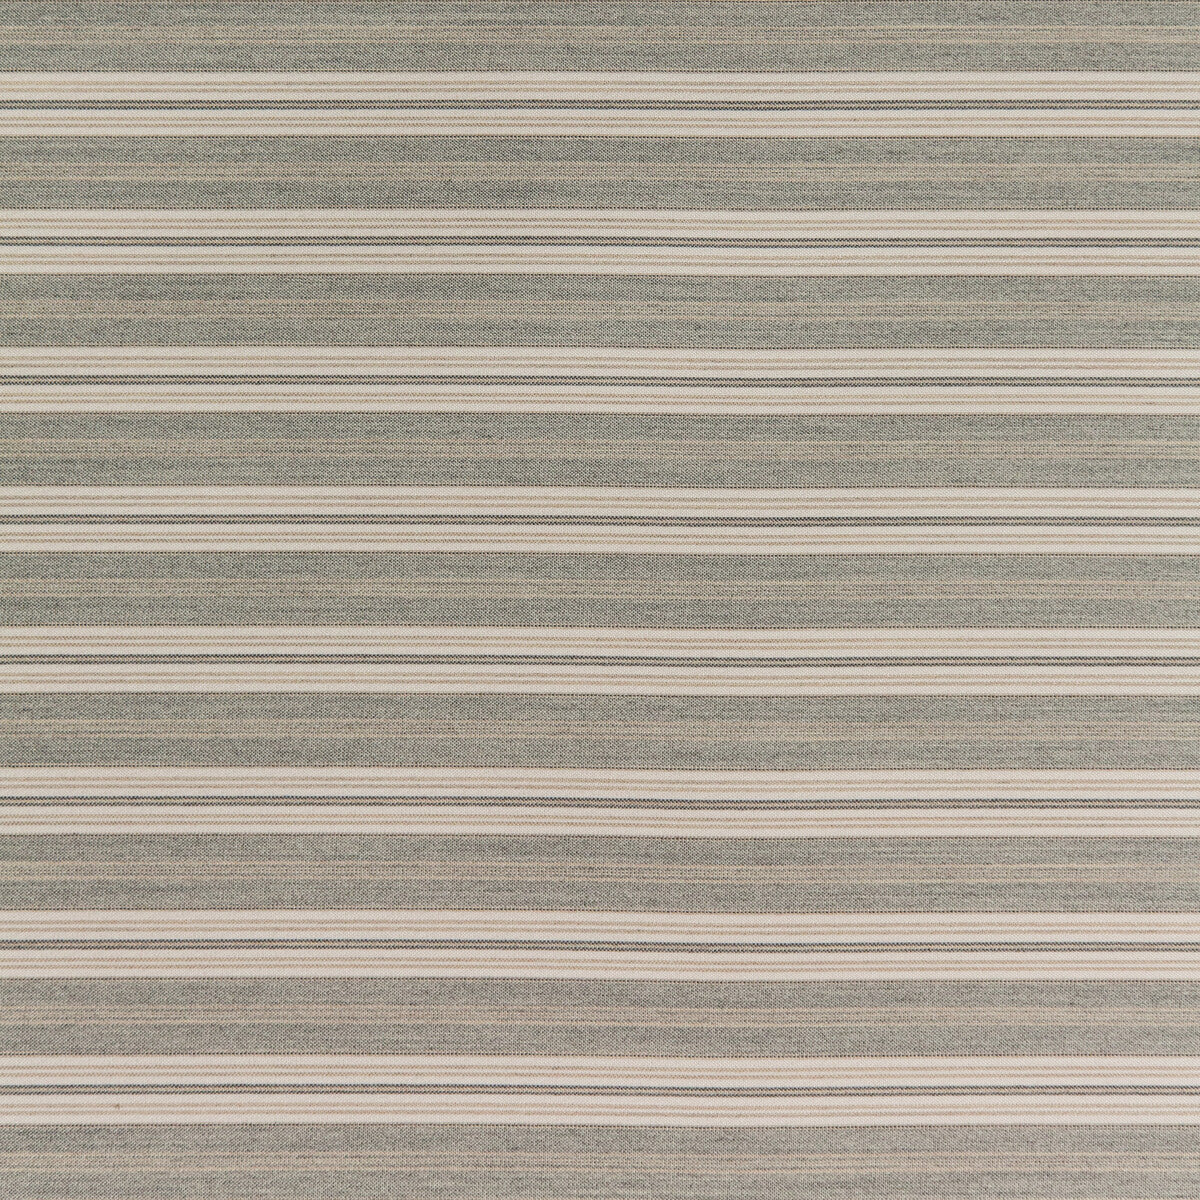 Hull Stripe fabric in stone color - pattern 35827.11.0 - by Kravet Design in the Indoor / Outdoor collection